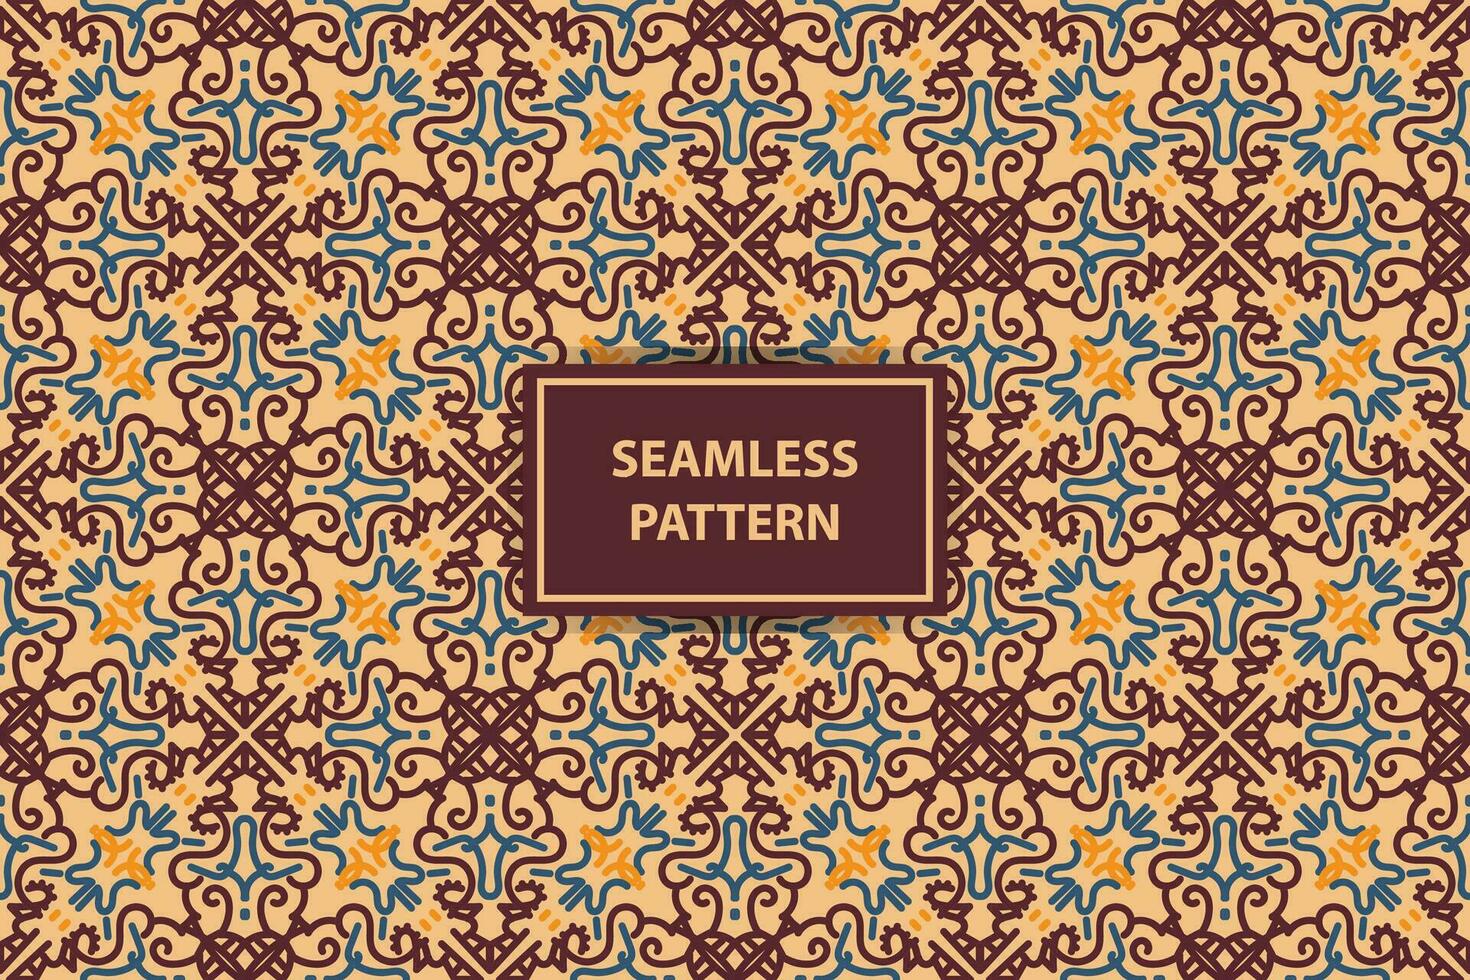 ornamental seamless pattern ornaments in traditional arabian, moroccan, turkish style. vintage abstract floral background texture. Modern minimal labels. Premium design vector